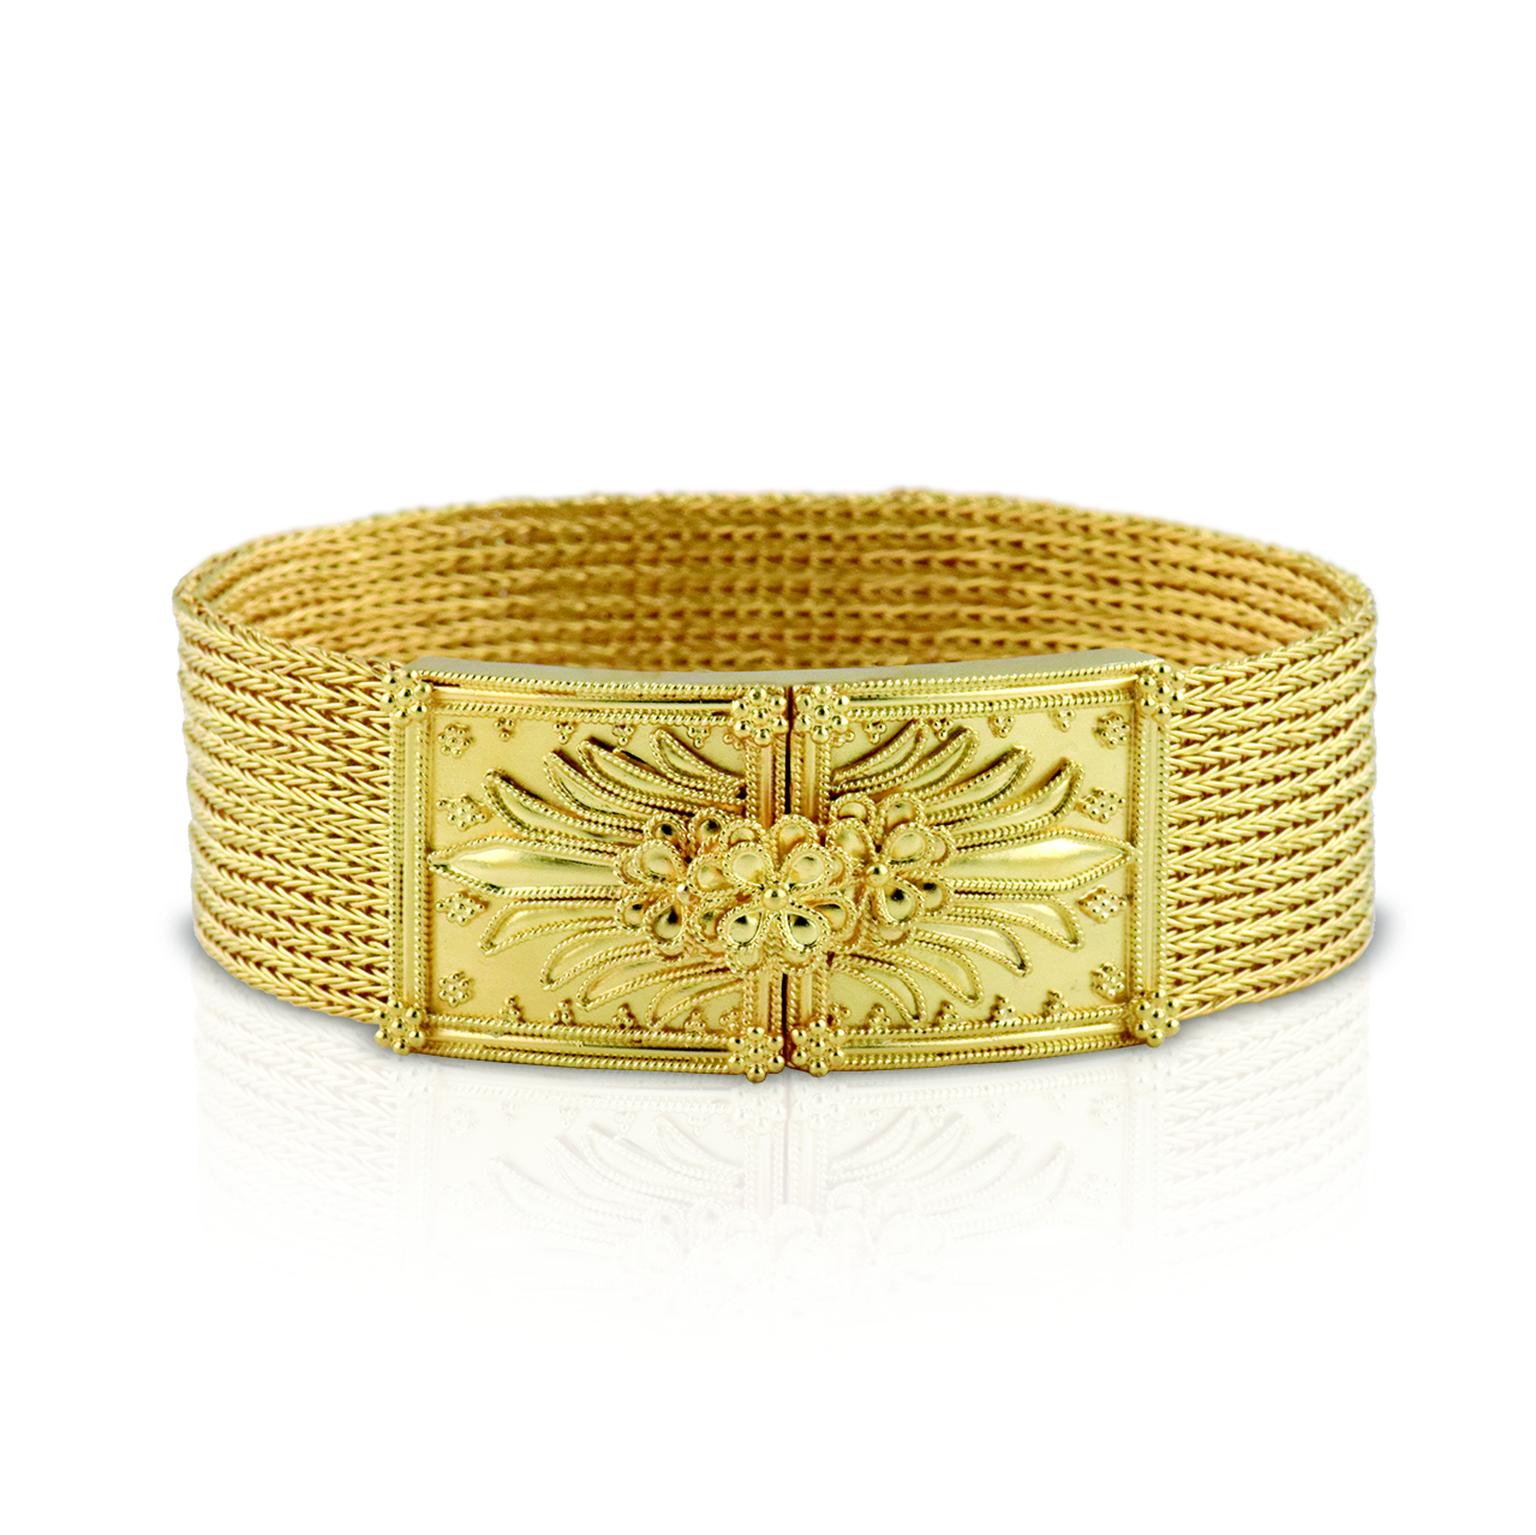 Hand-woven Hellenistic choker necklace  byLalaounis